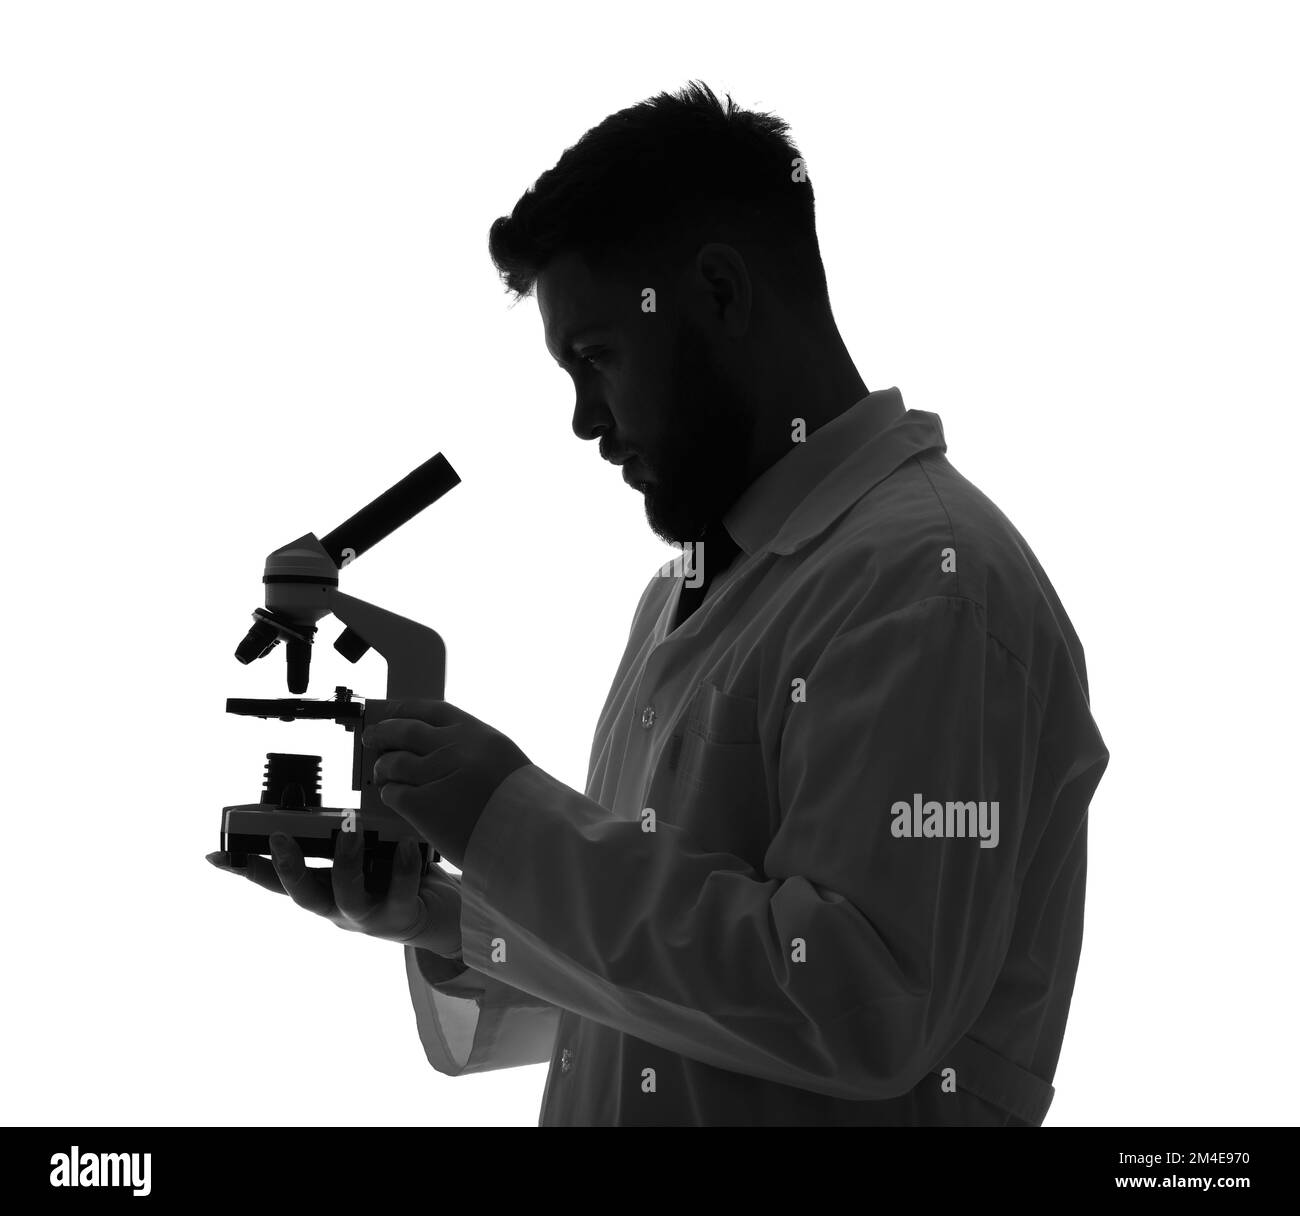 Silhouette of male scientist with microscope on white background Stock Photo